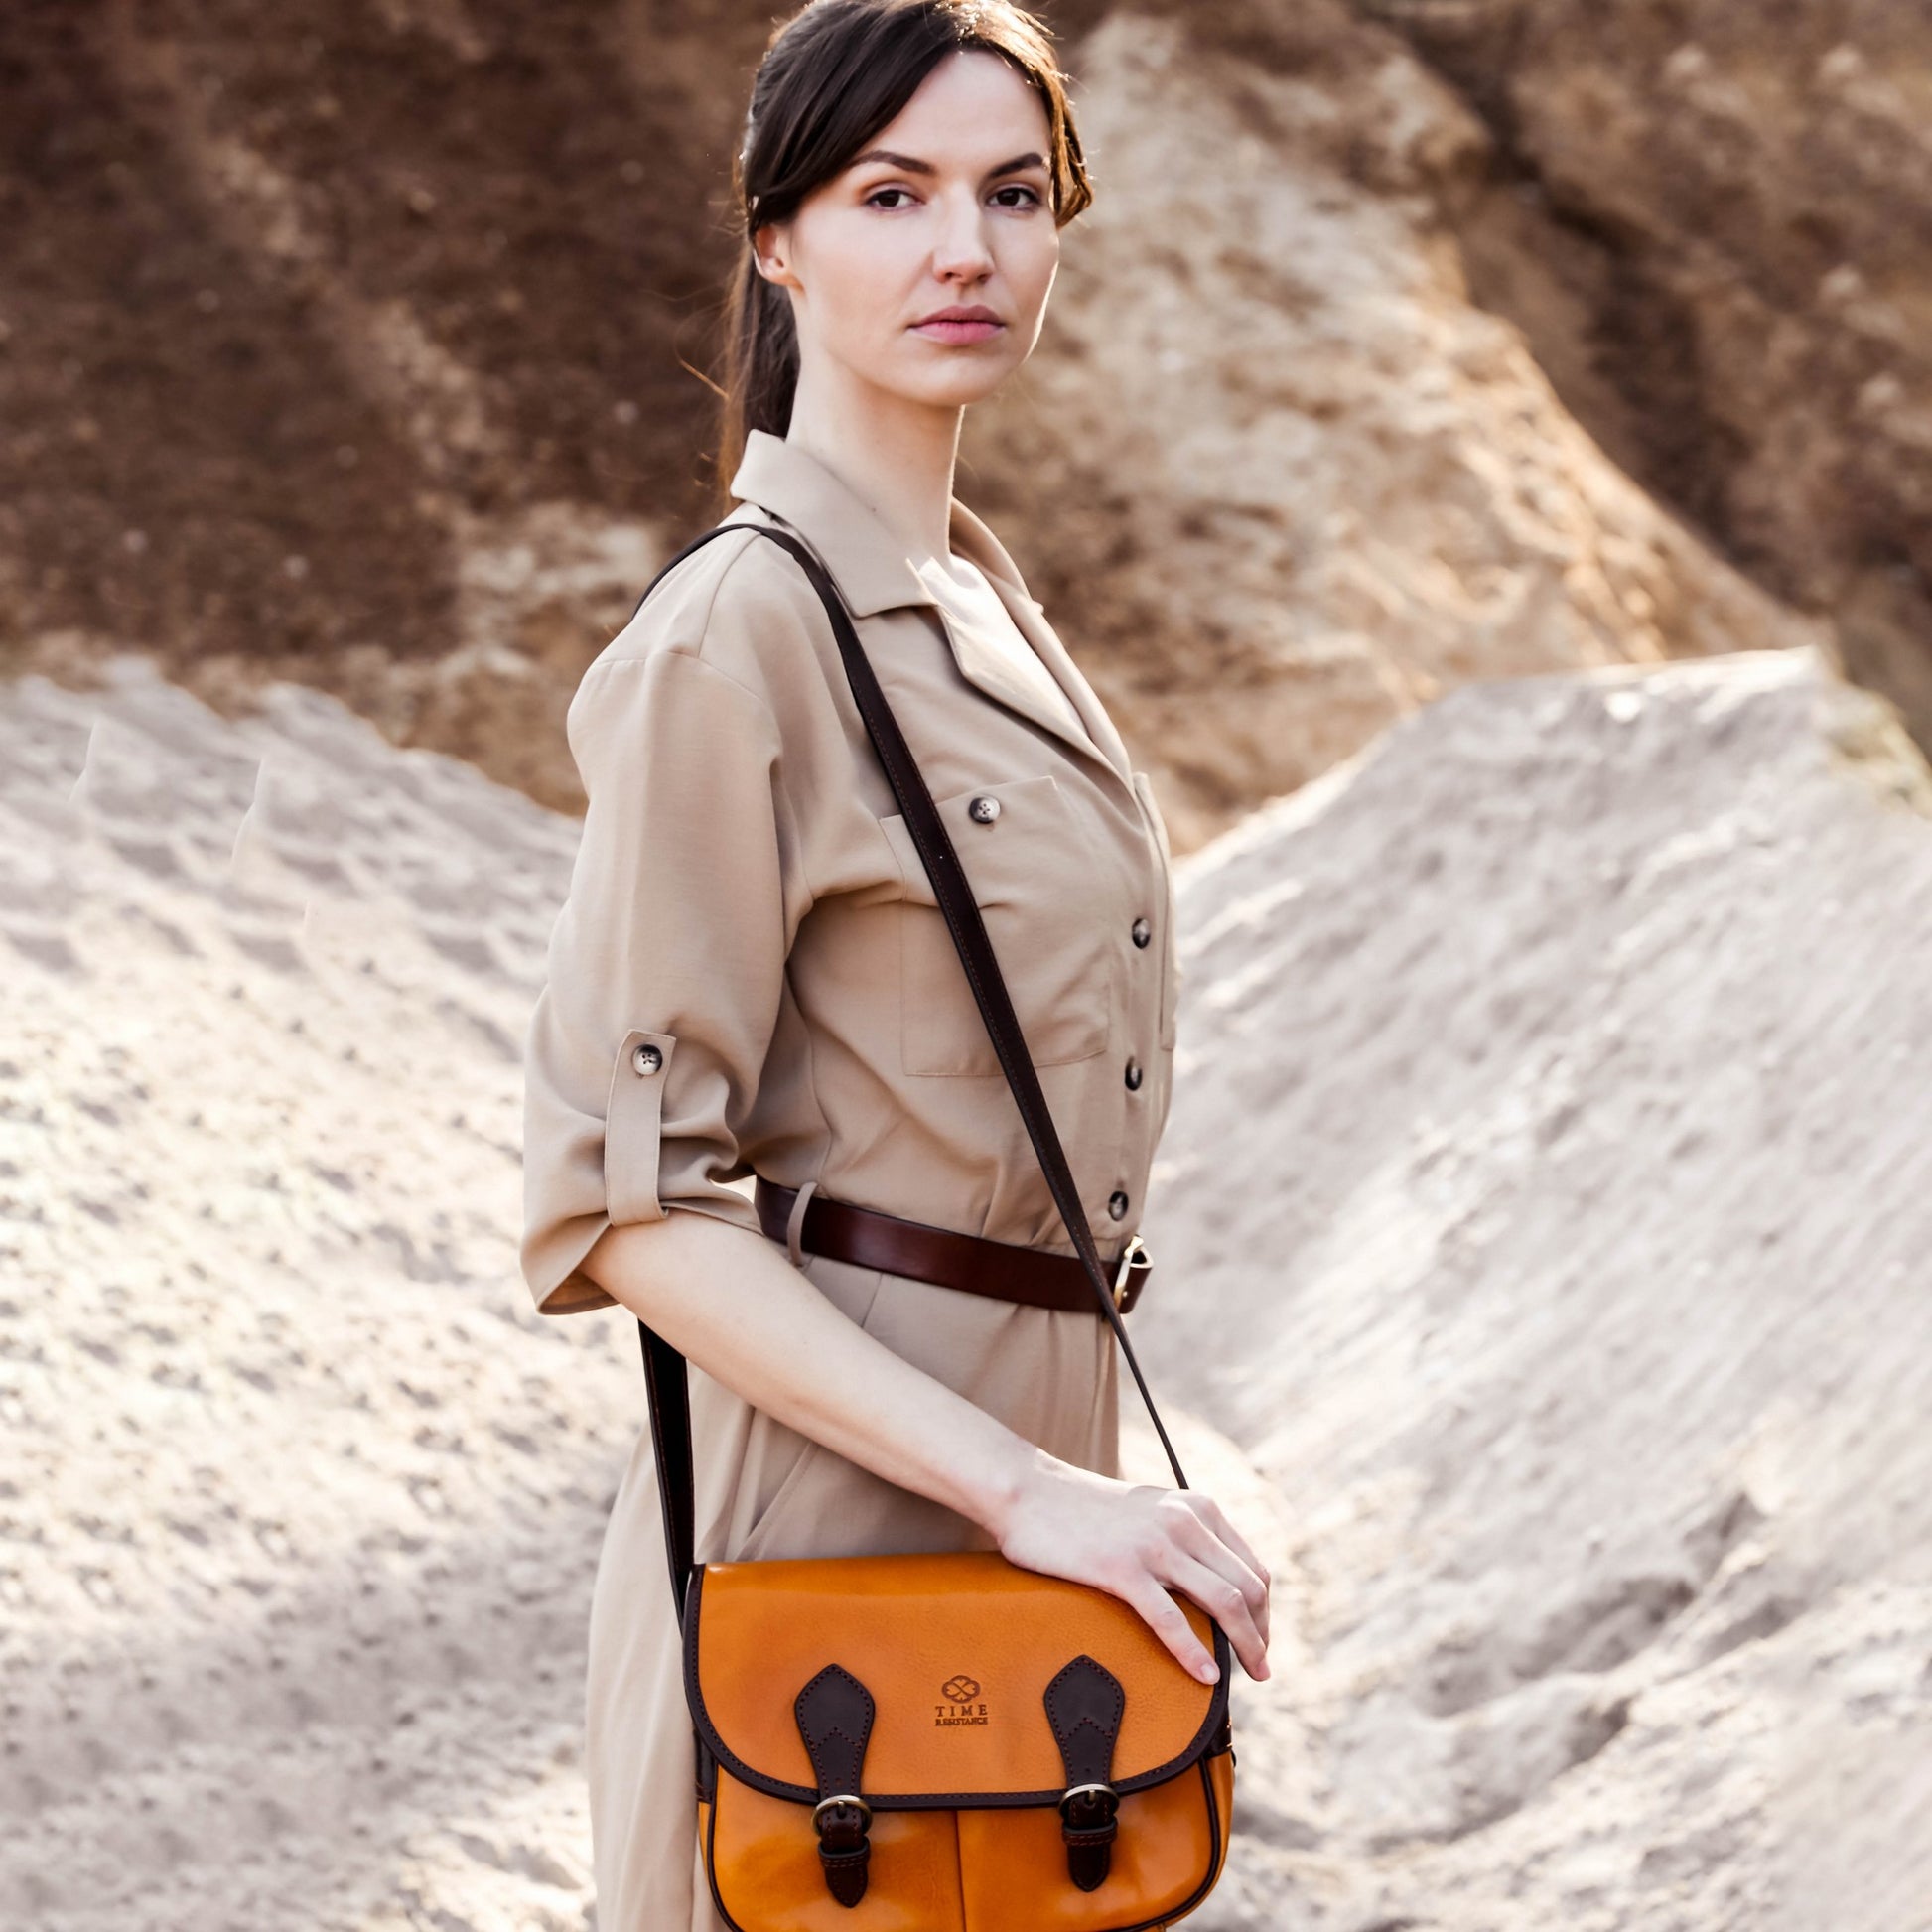 Leather Cross Body Bag - The Paris Wife For Women Time Resistance   